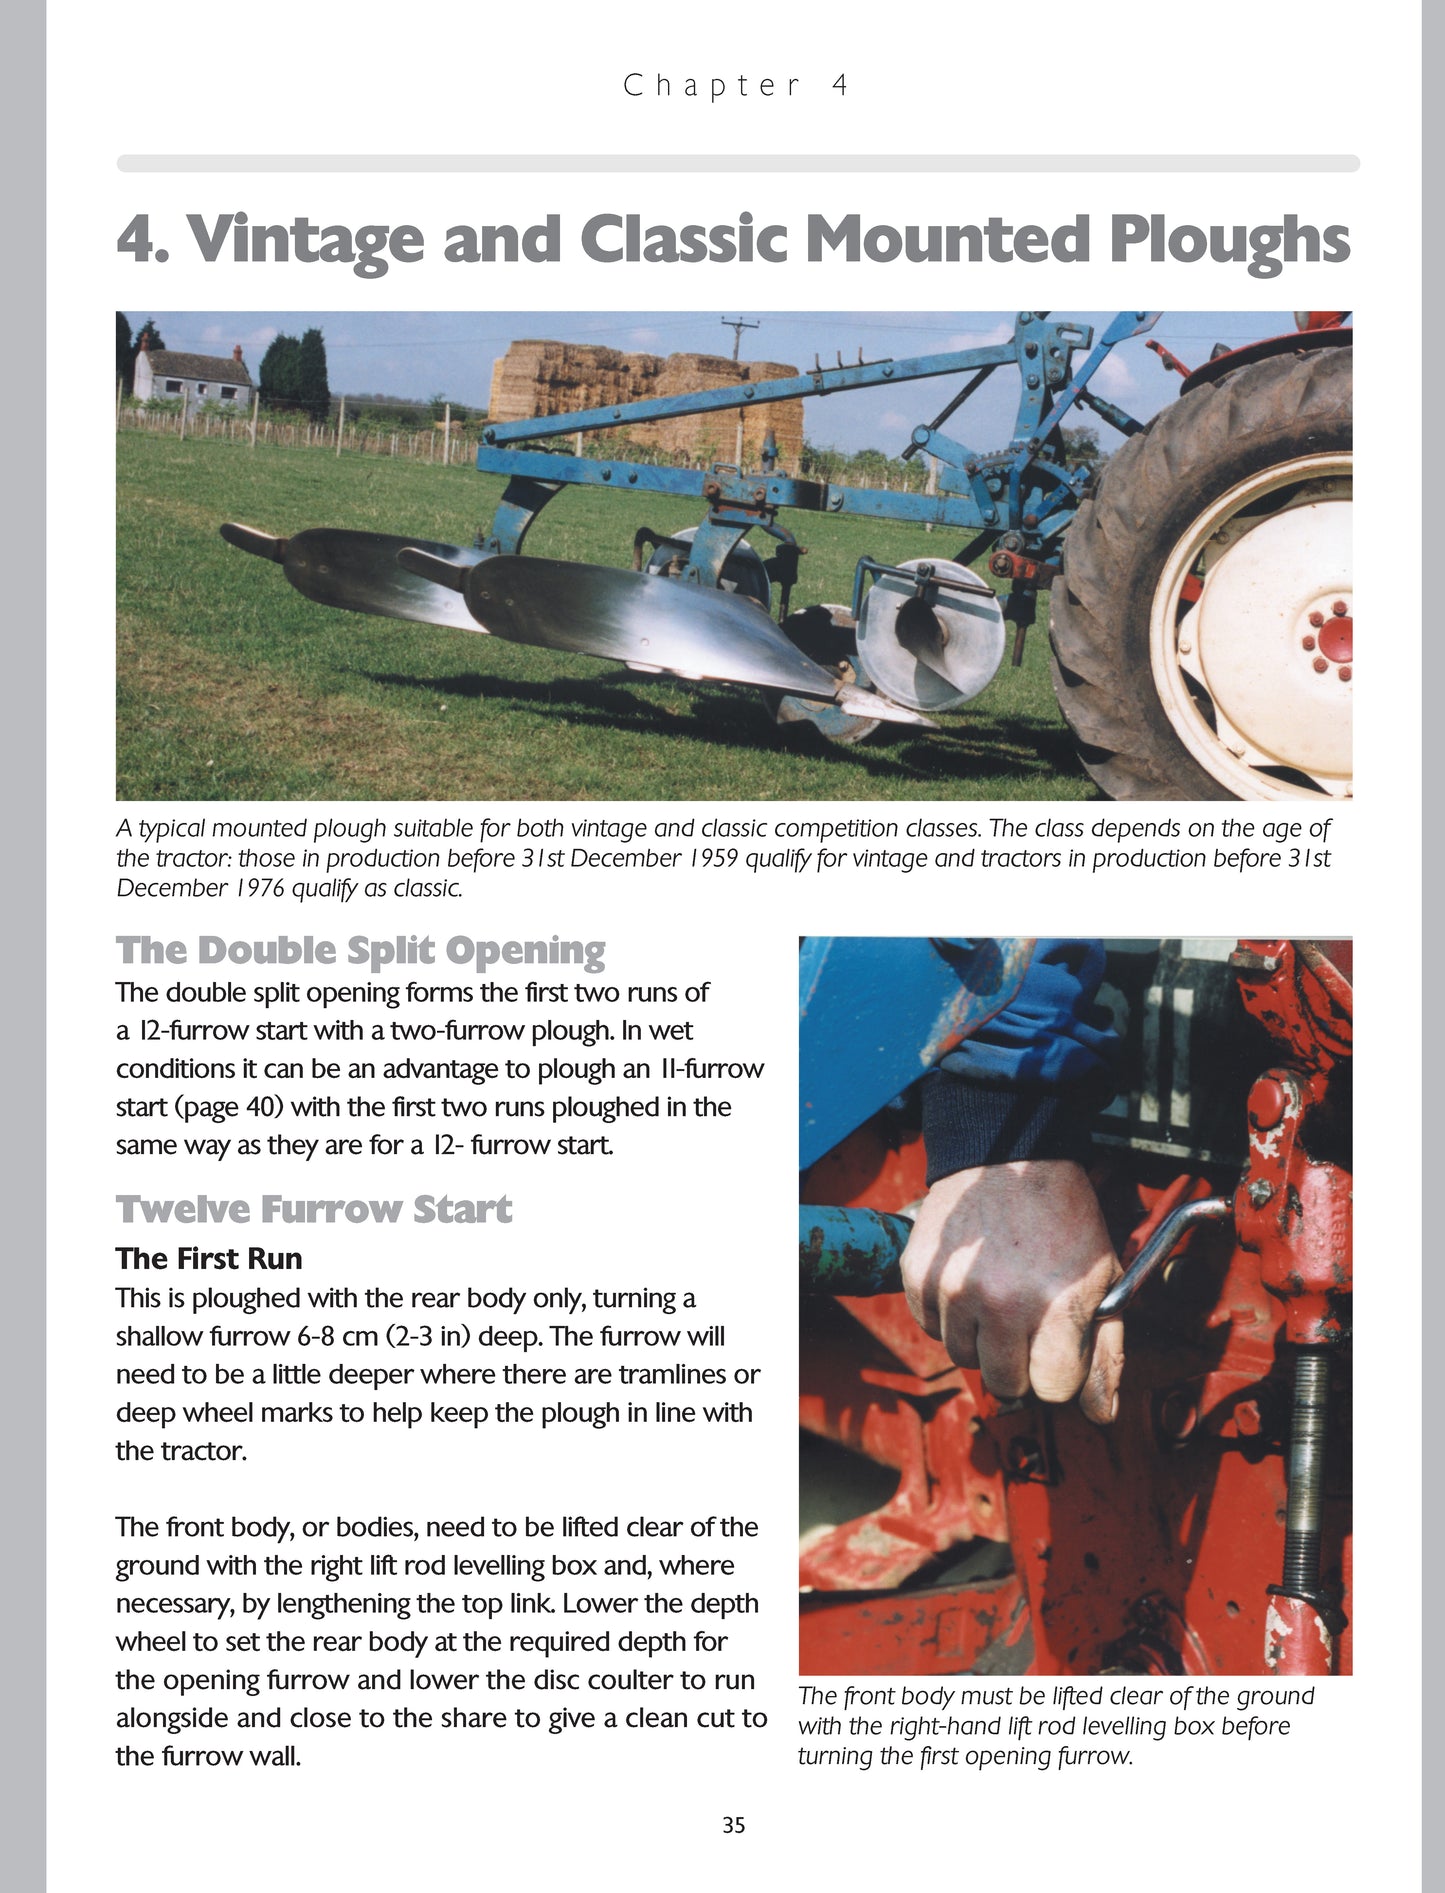 Tractor Ploughing Manual, The, 2nd Edition